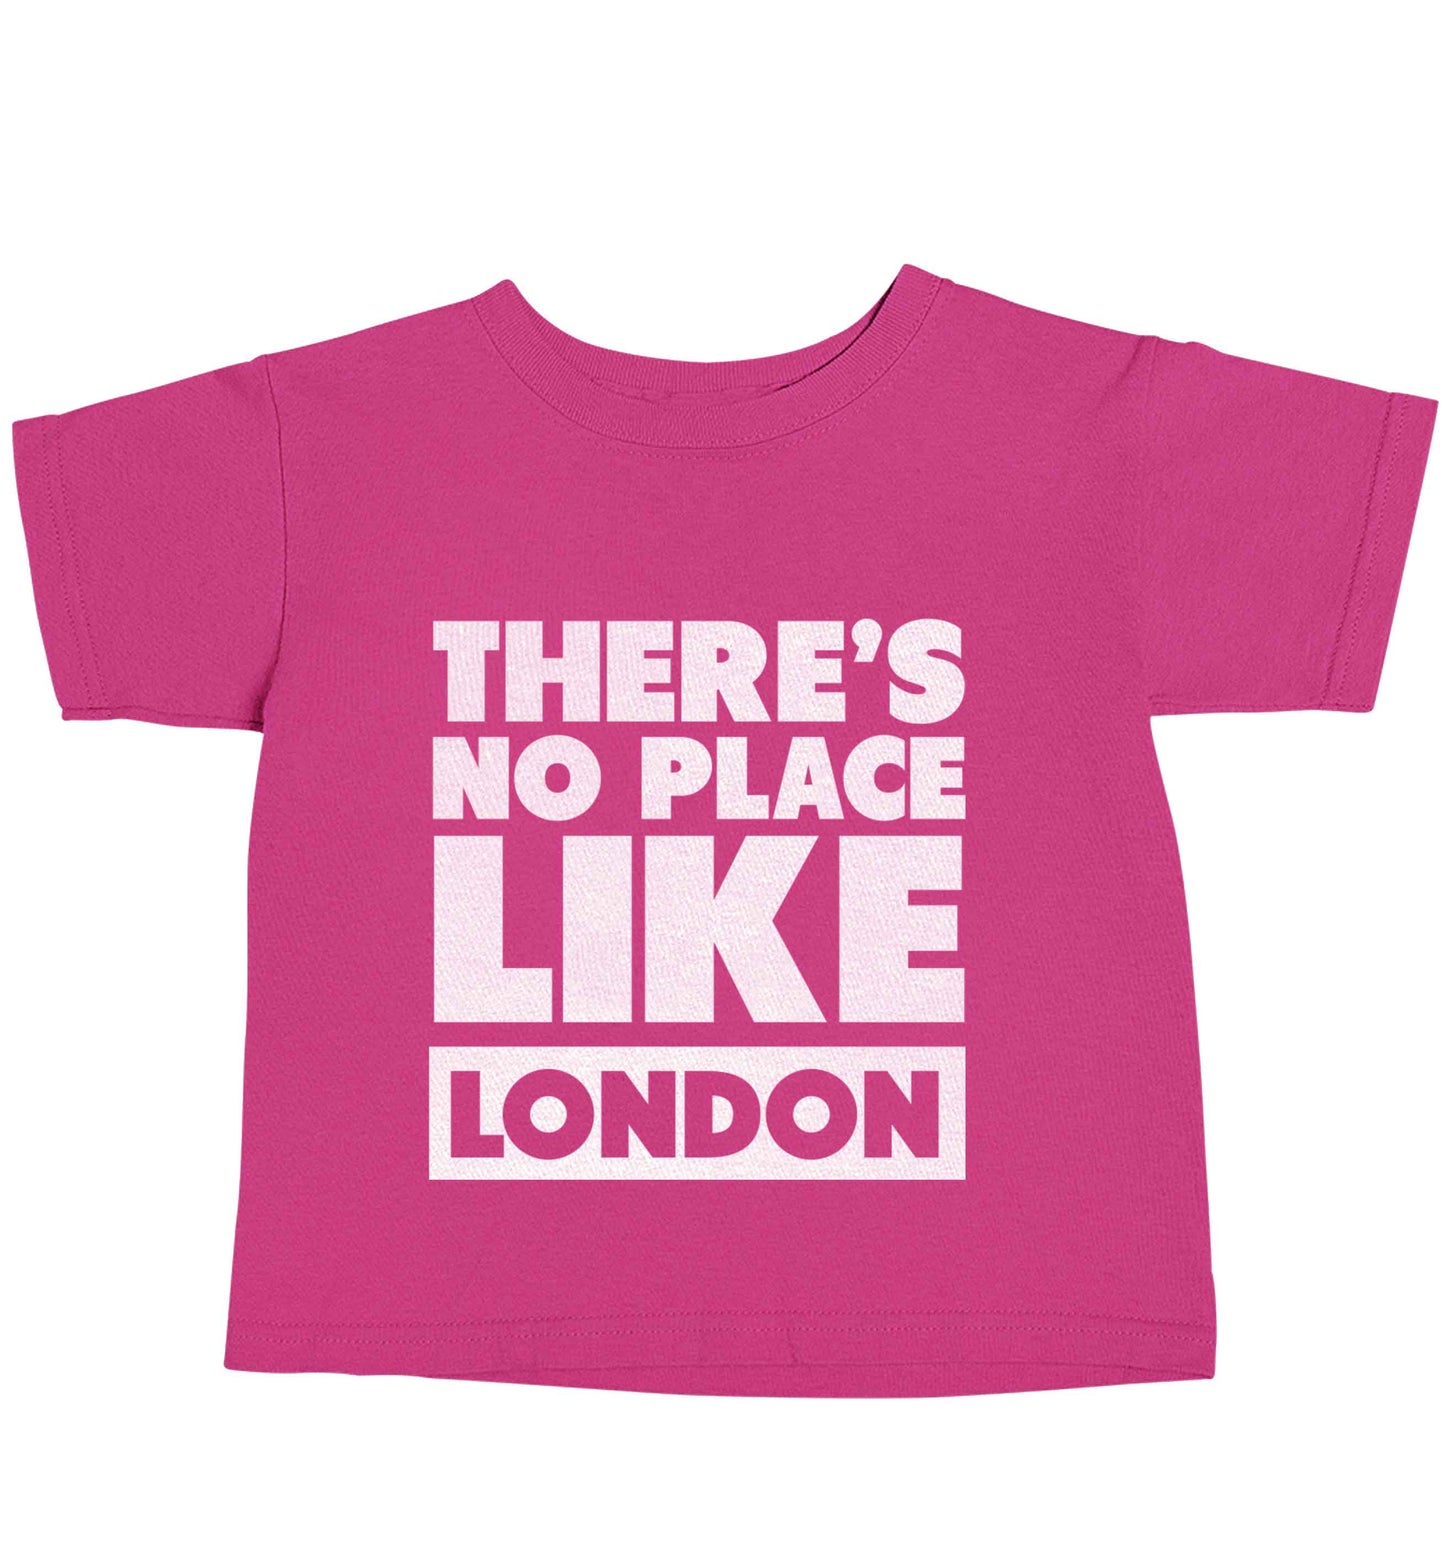 There's no place like England pink baby toddler Tshirt 2 Years